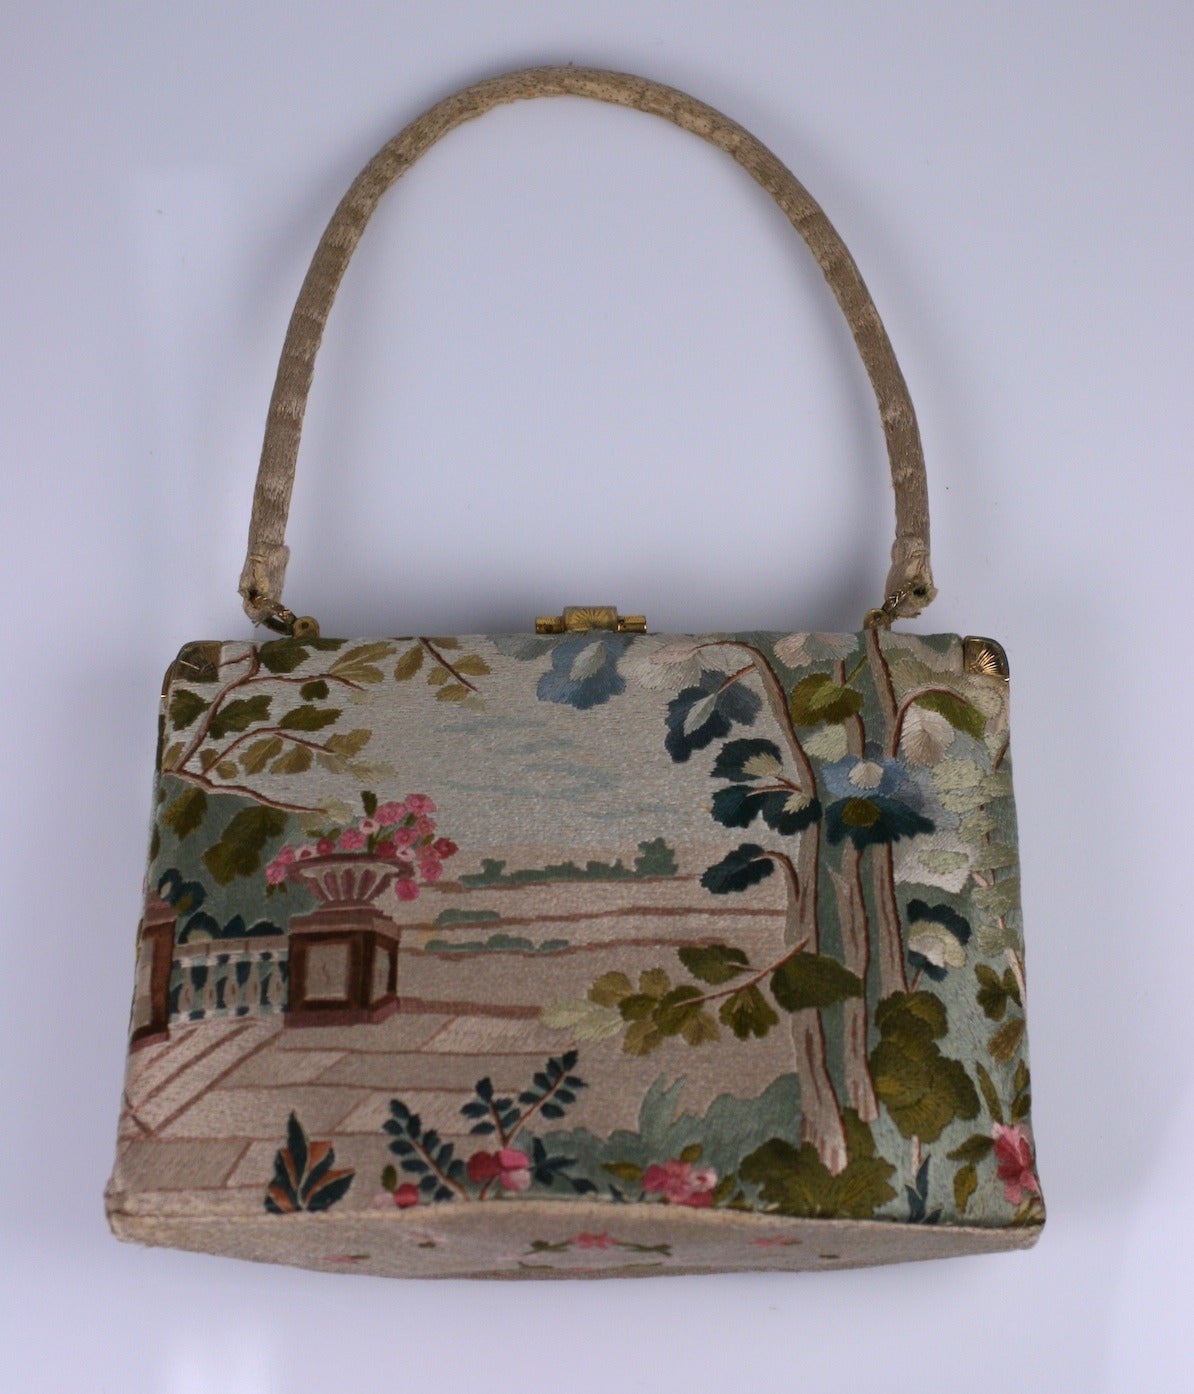 Charming french bag from the 1950's fully embroidered with silk floss on all sides includung handle. One side depicts an 18th Century courtesan scene and the other depicts a garden scene. Beautiful quality embroidery. 
8.5